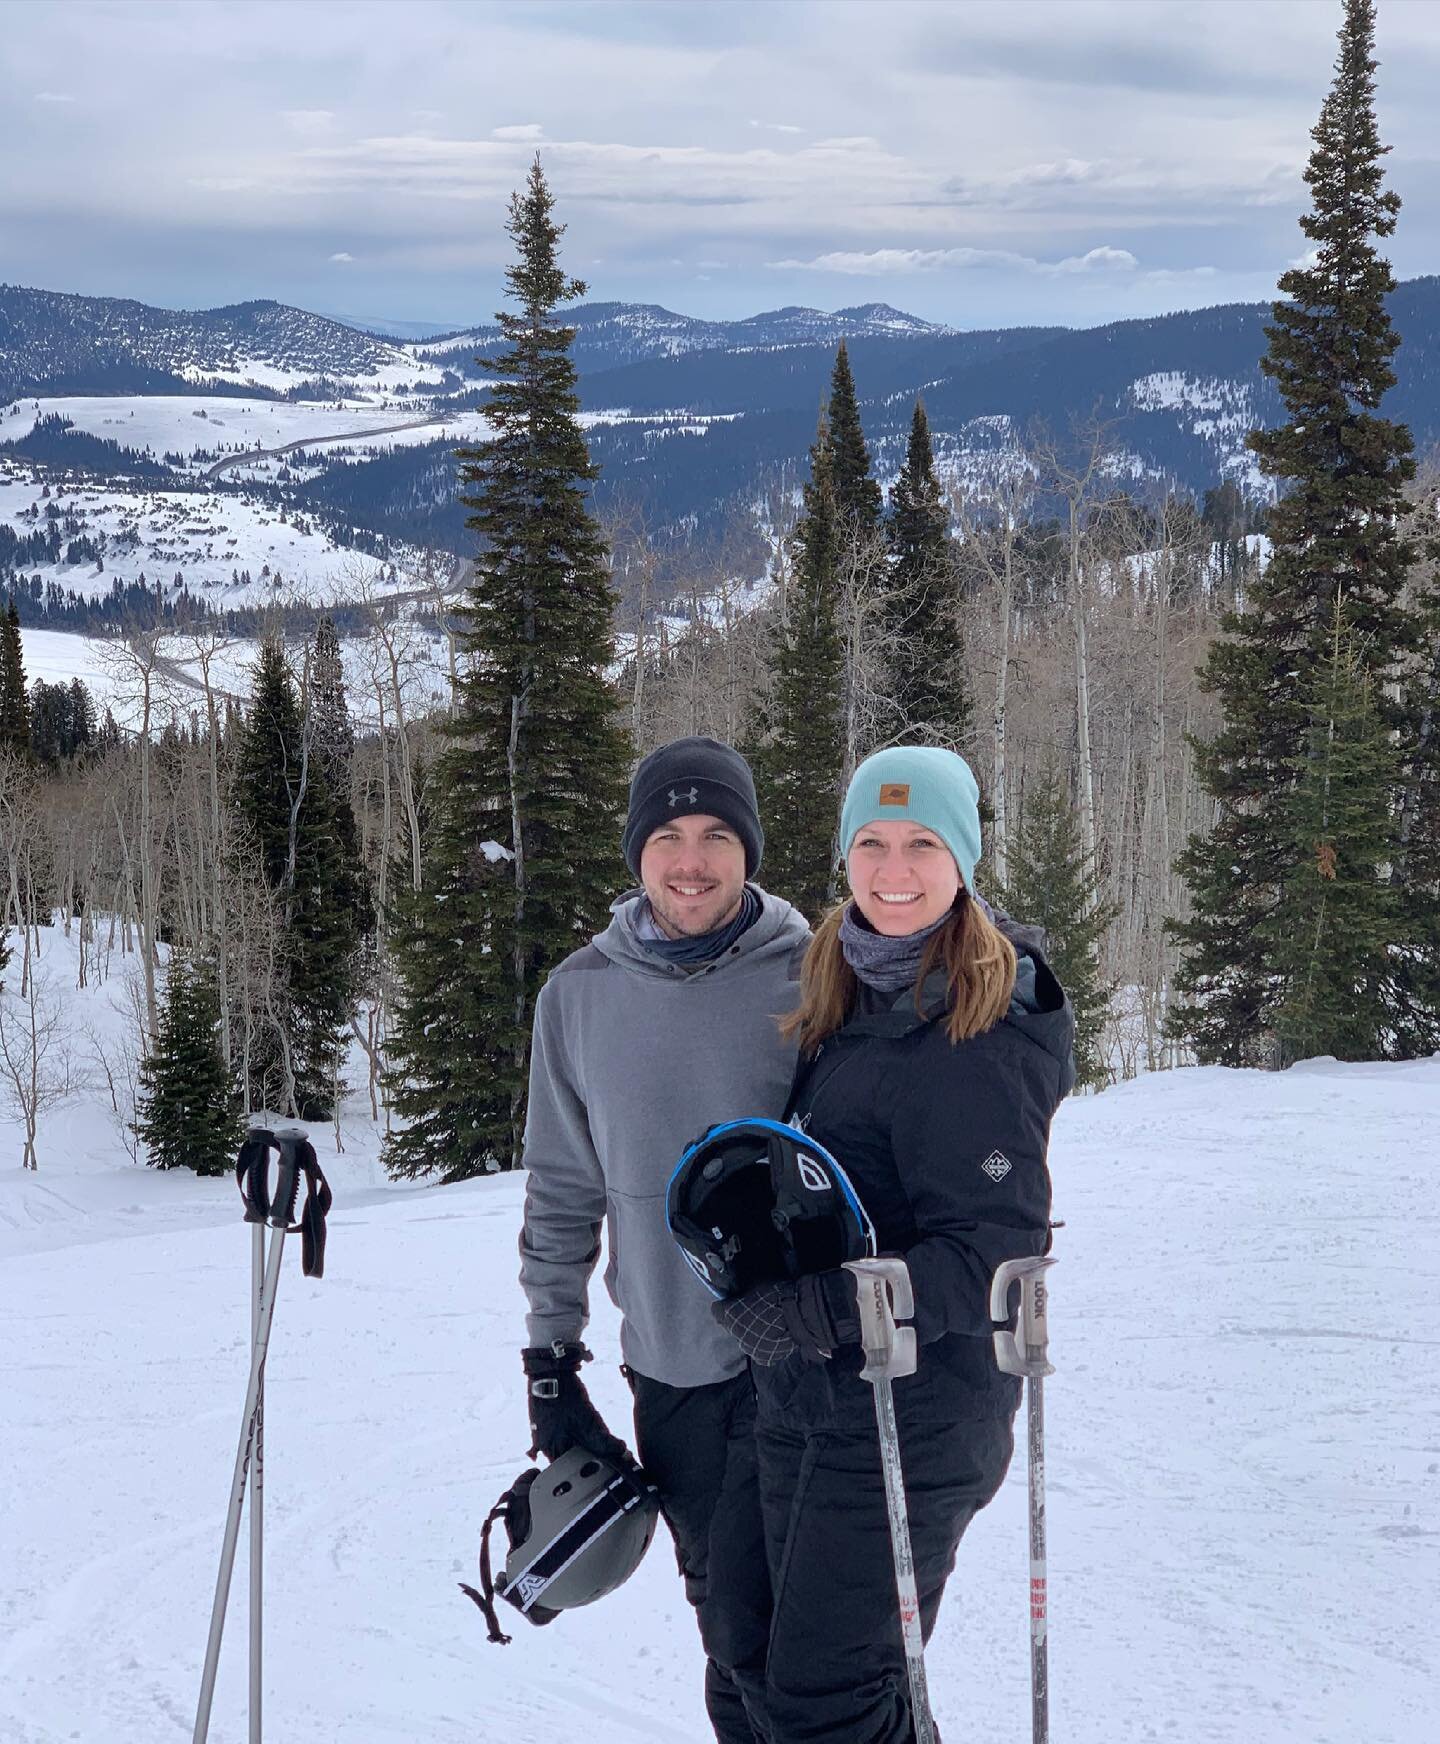 Probably the last time we go skiing this year! Had a blast all year. I think it&rsquo;s time to go camping. Who agrees?

Also this new @bruntworkwear sweatshirt is straight 🔥!

#mullenthemaker #skiing #family #ski